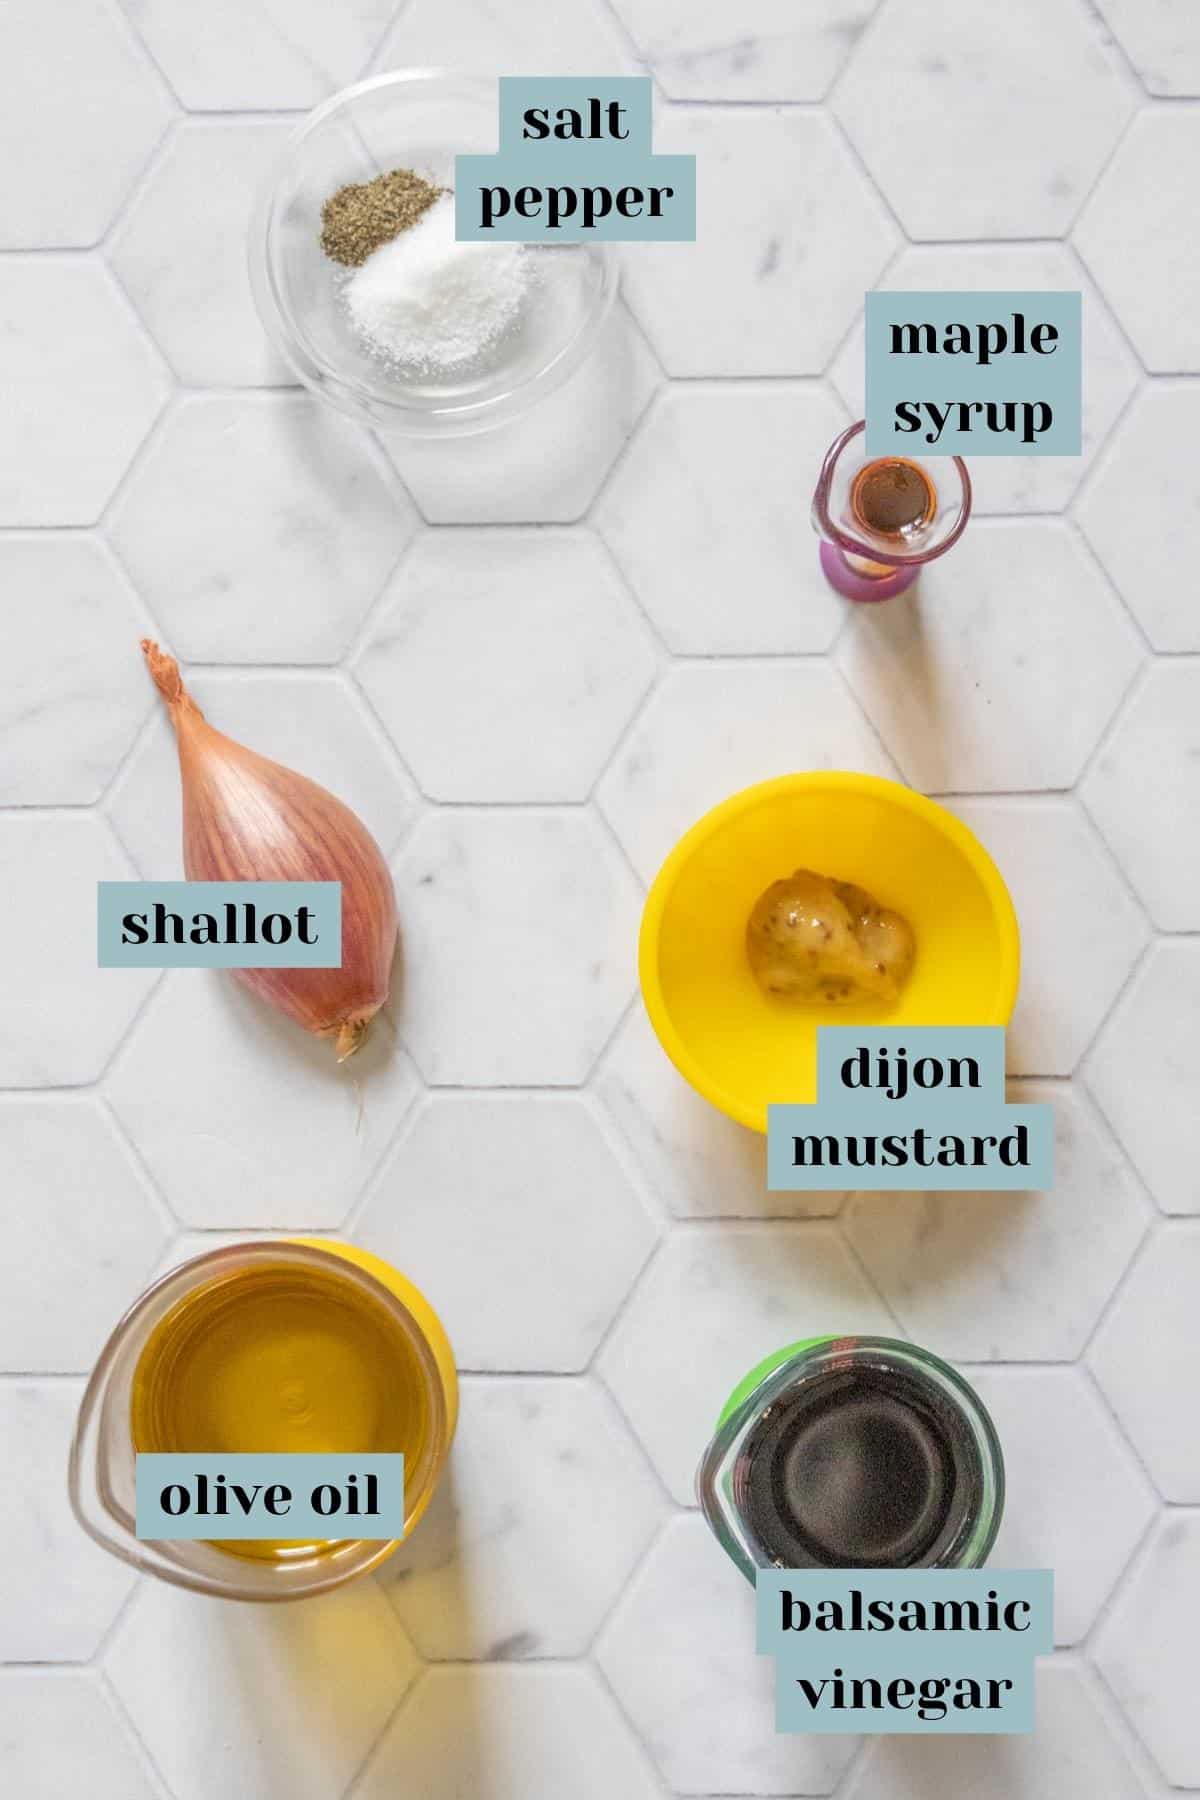 Ingredients for balsamic vinaigrette on a tile surface with labels.